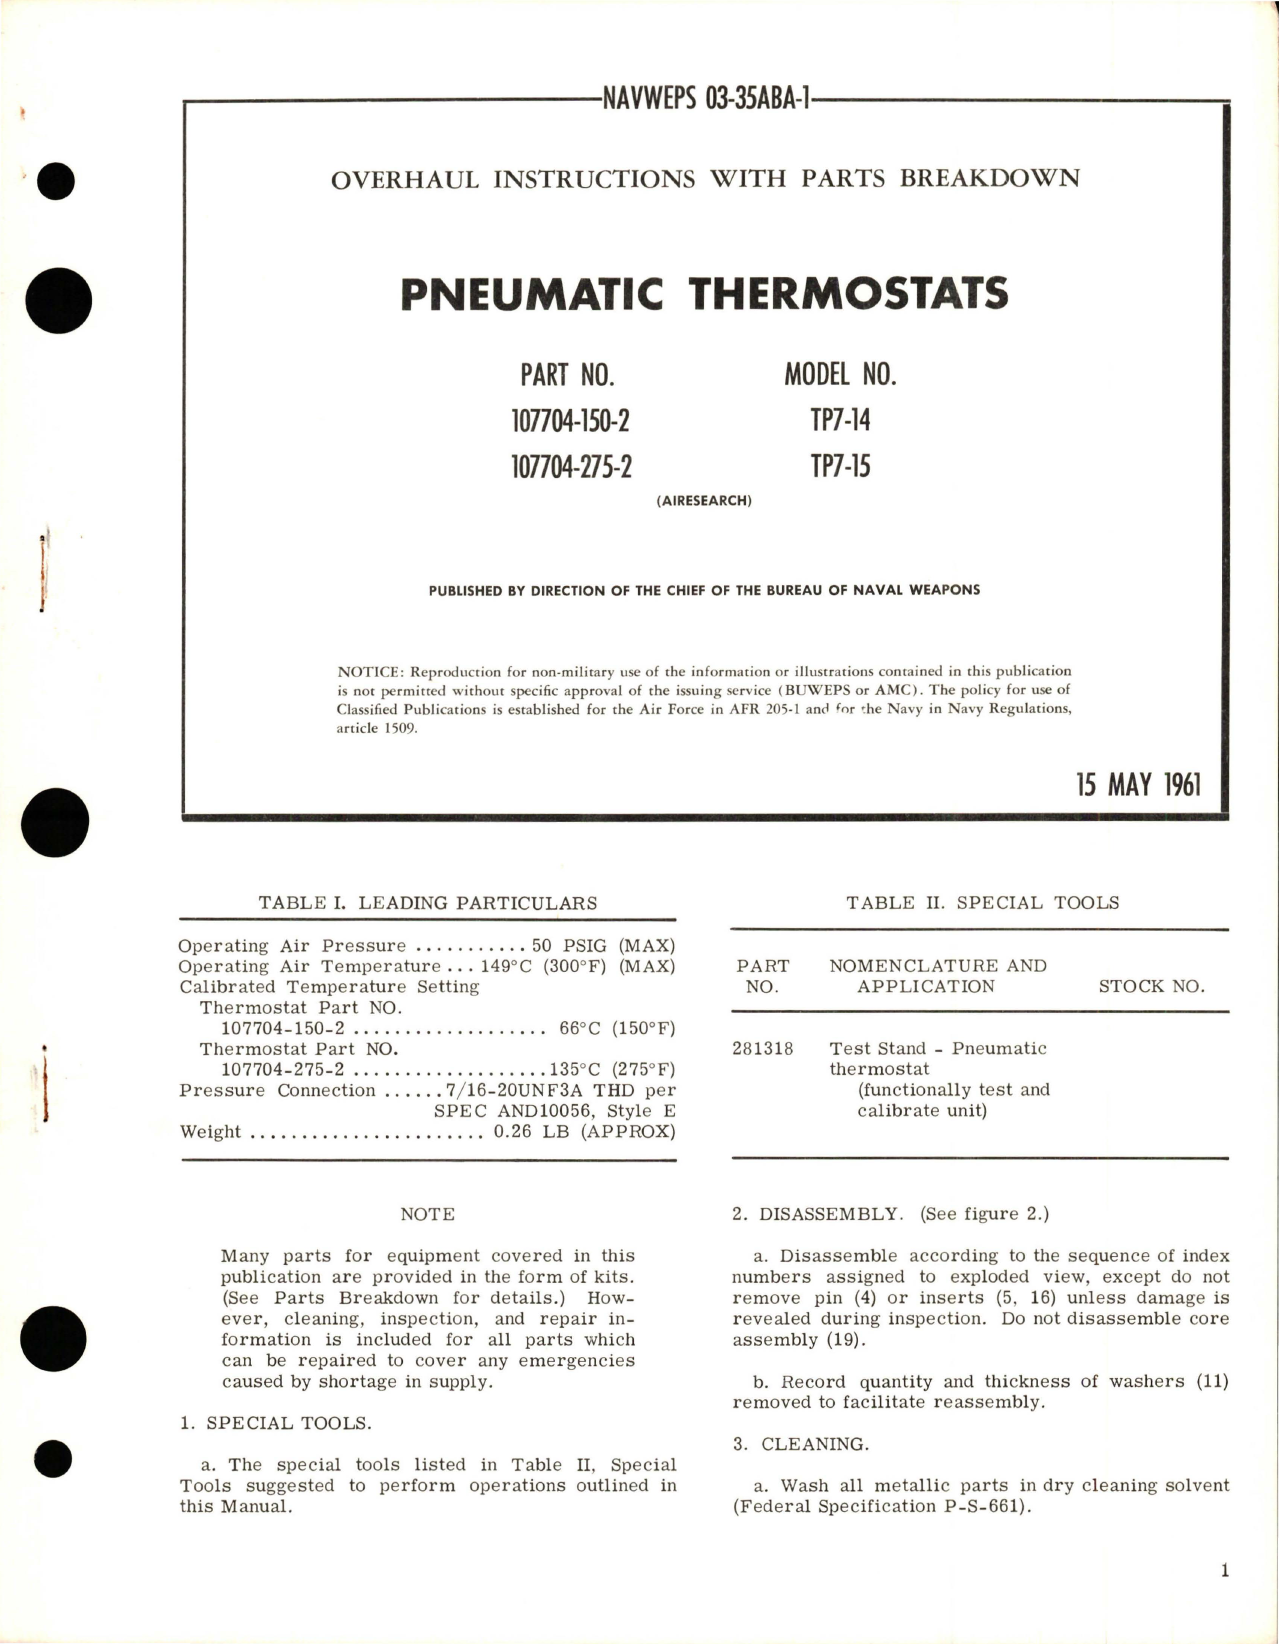 Sample page 1 from AirCorps Library document: Overhaul Instructions with Parts Breakdown for Pneumatic Thermostats - Parts 107704-150-2 and 107704-275-2